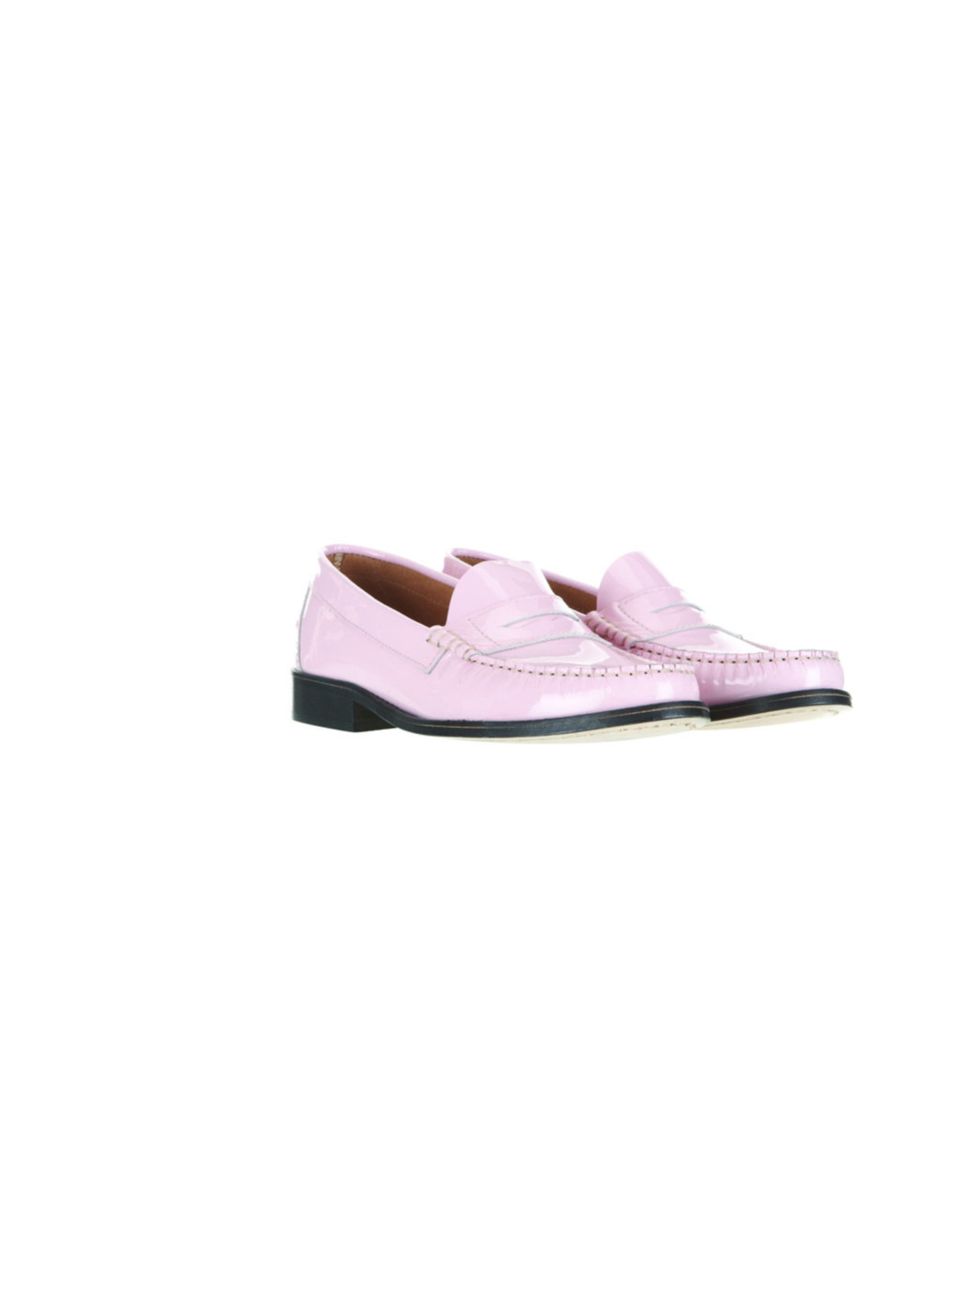 <p>J.W. Anderson x Topshop pink leather loafers, £70</p>